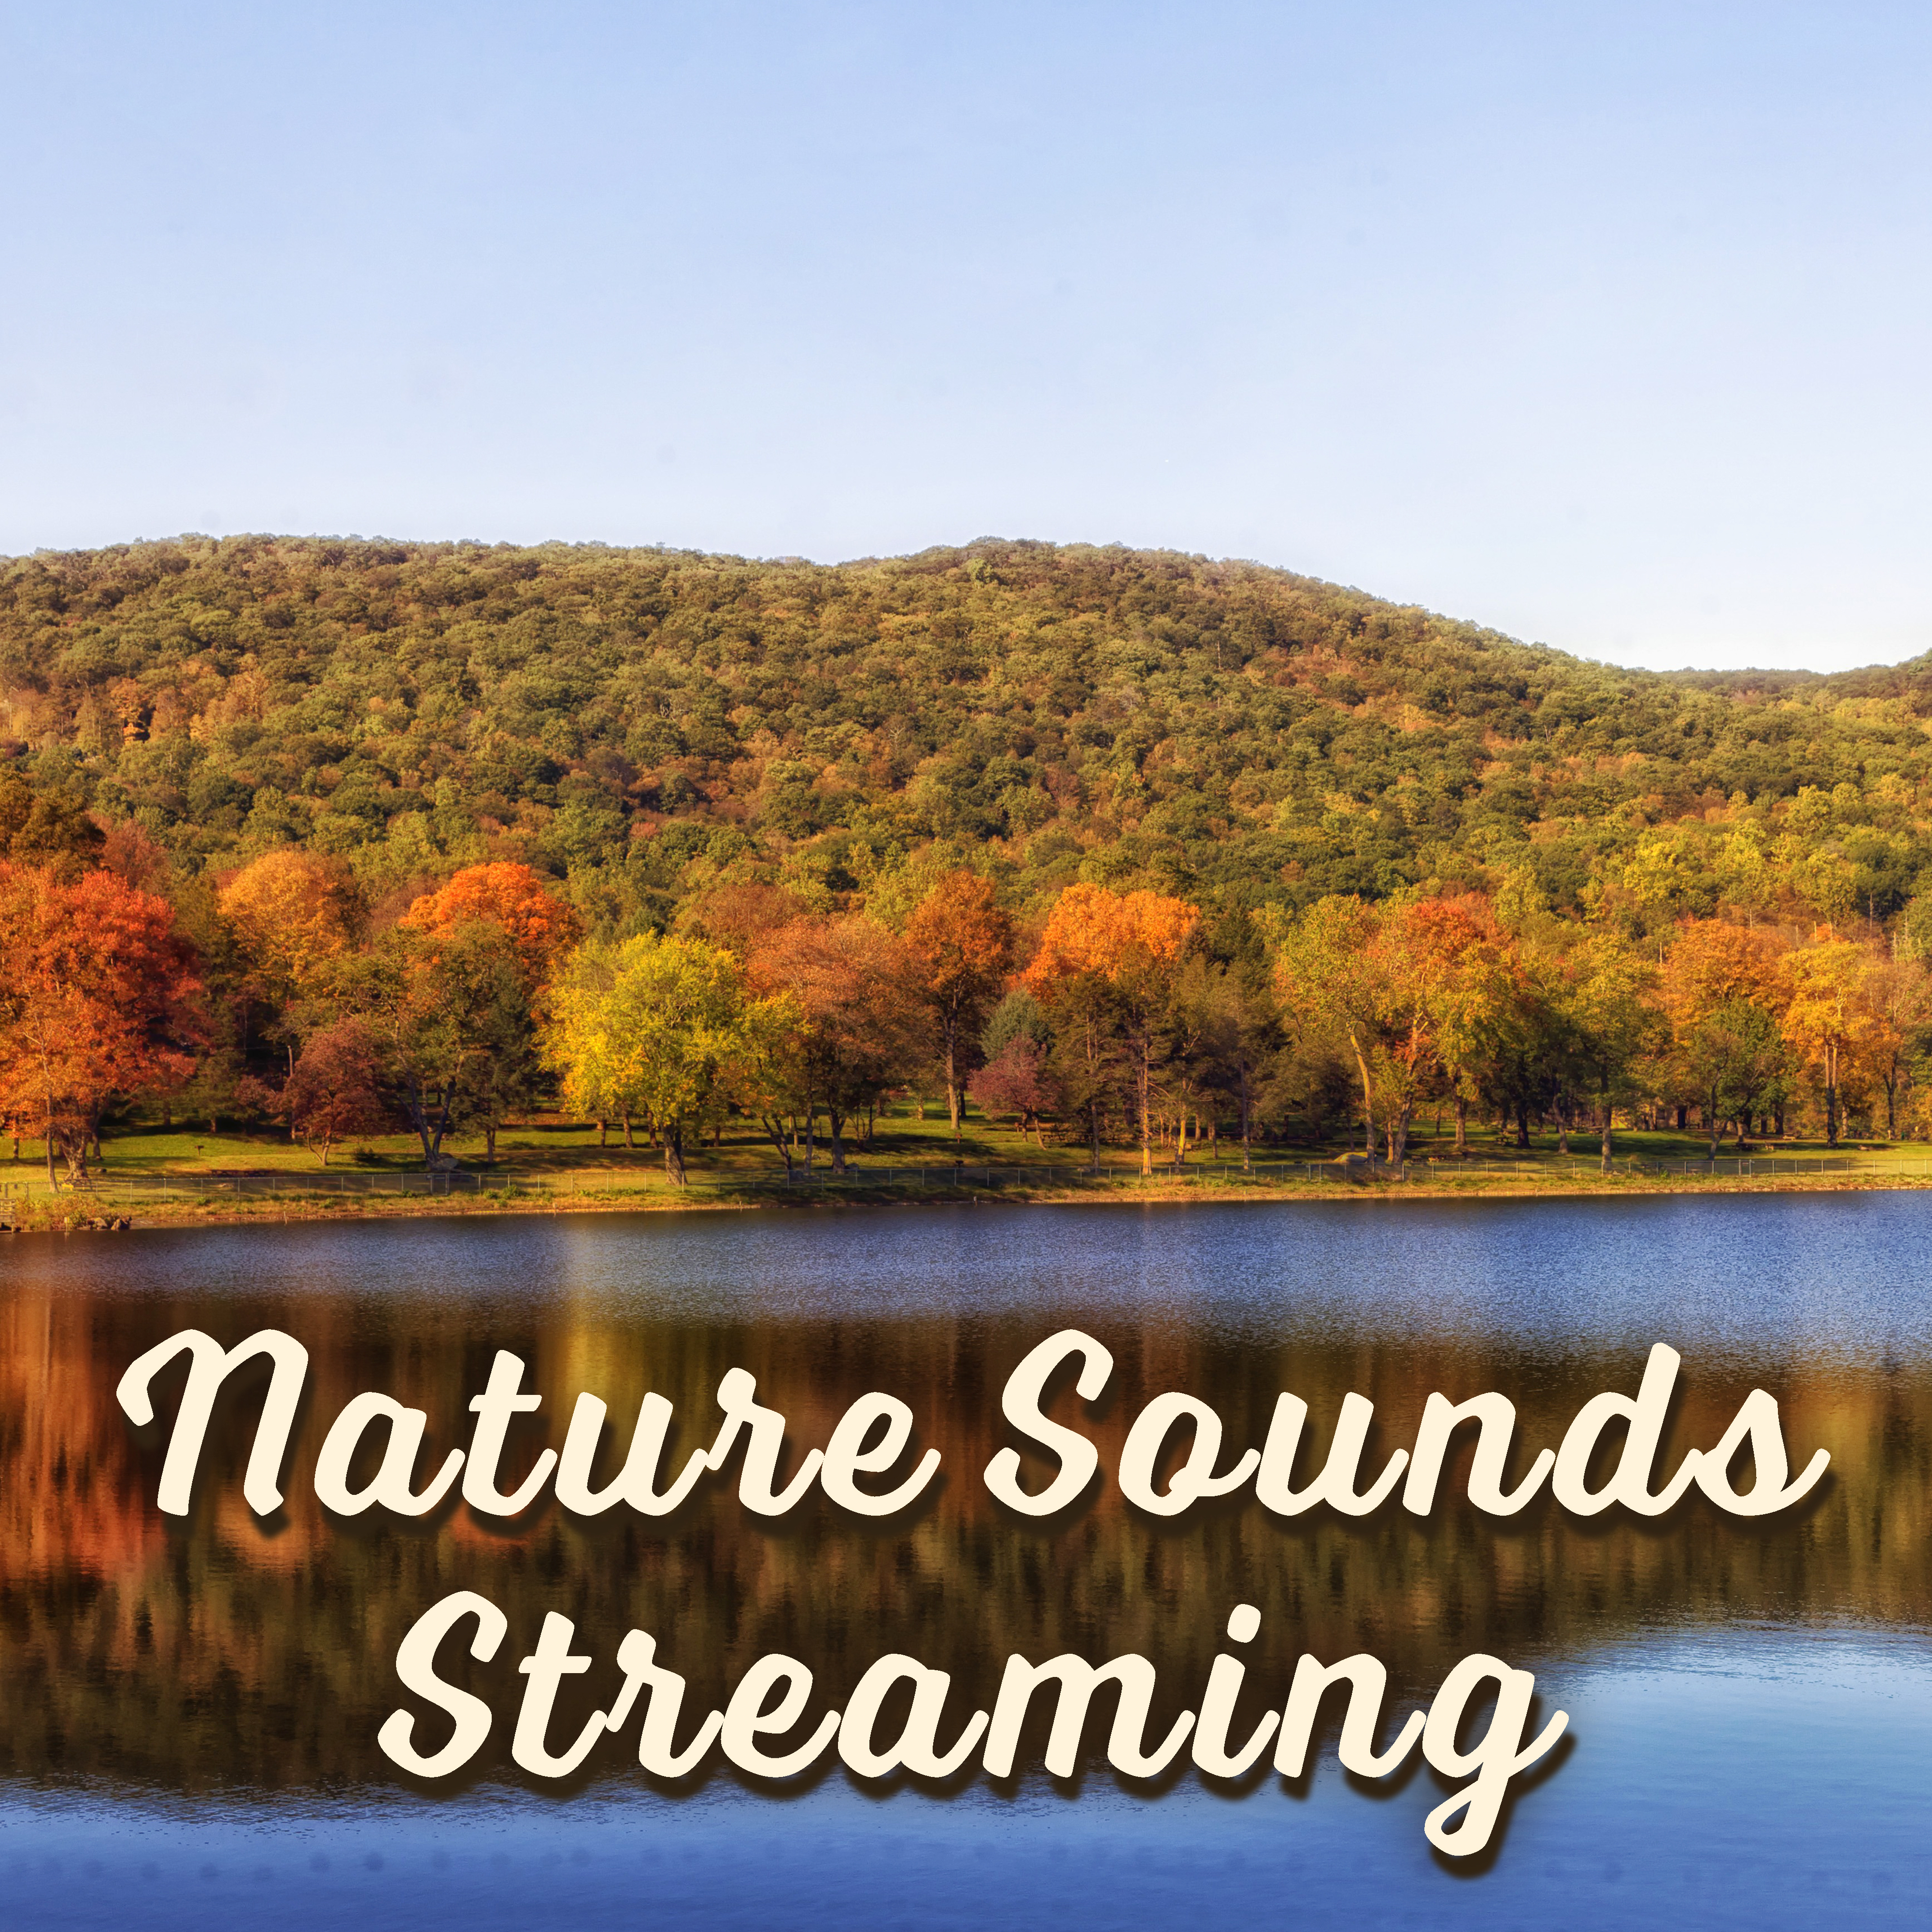 Nature Sounds Streaming – The Best of Relaxing Music, Fresh New Age 2017, Relief Stress, Music Therapy